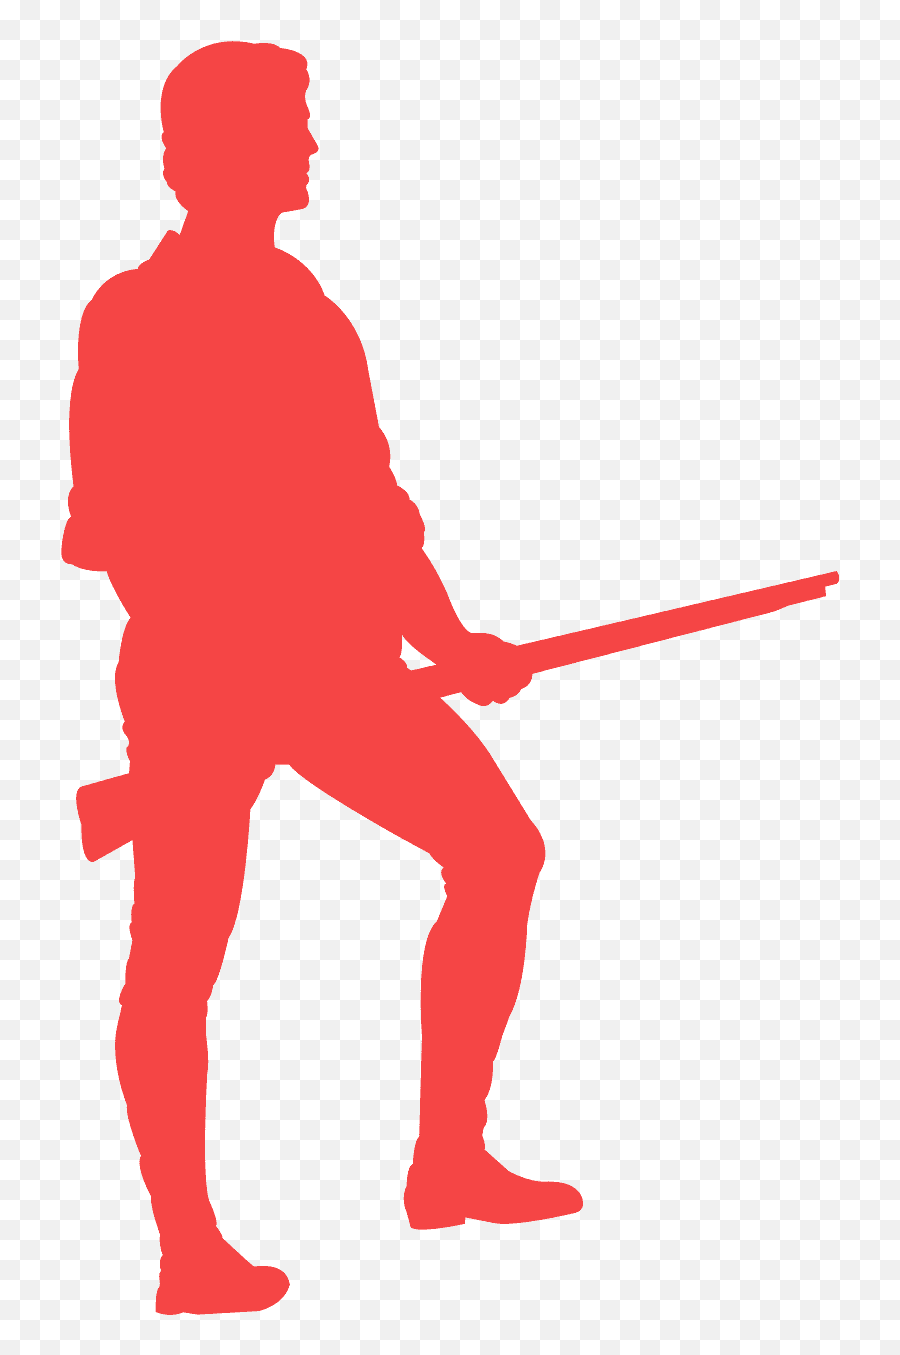 Man Holding A Gun Silhouette - Free Vector Silhouettes Revolutionary War Soldier Silhouette Png,Man With Gun Png